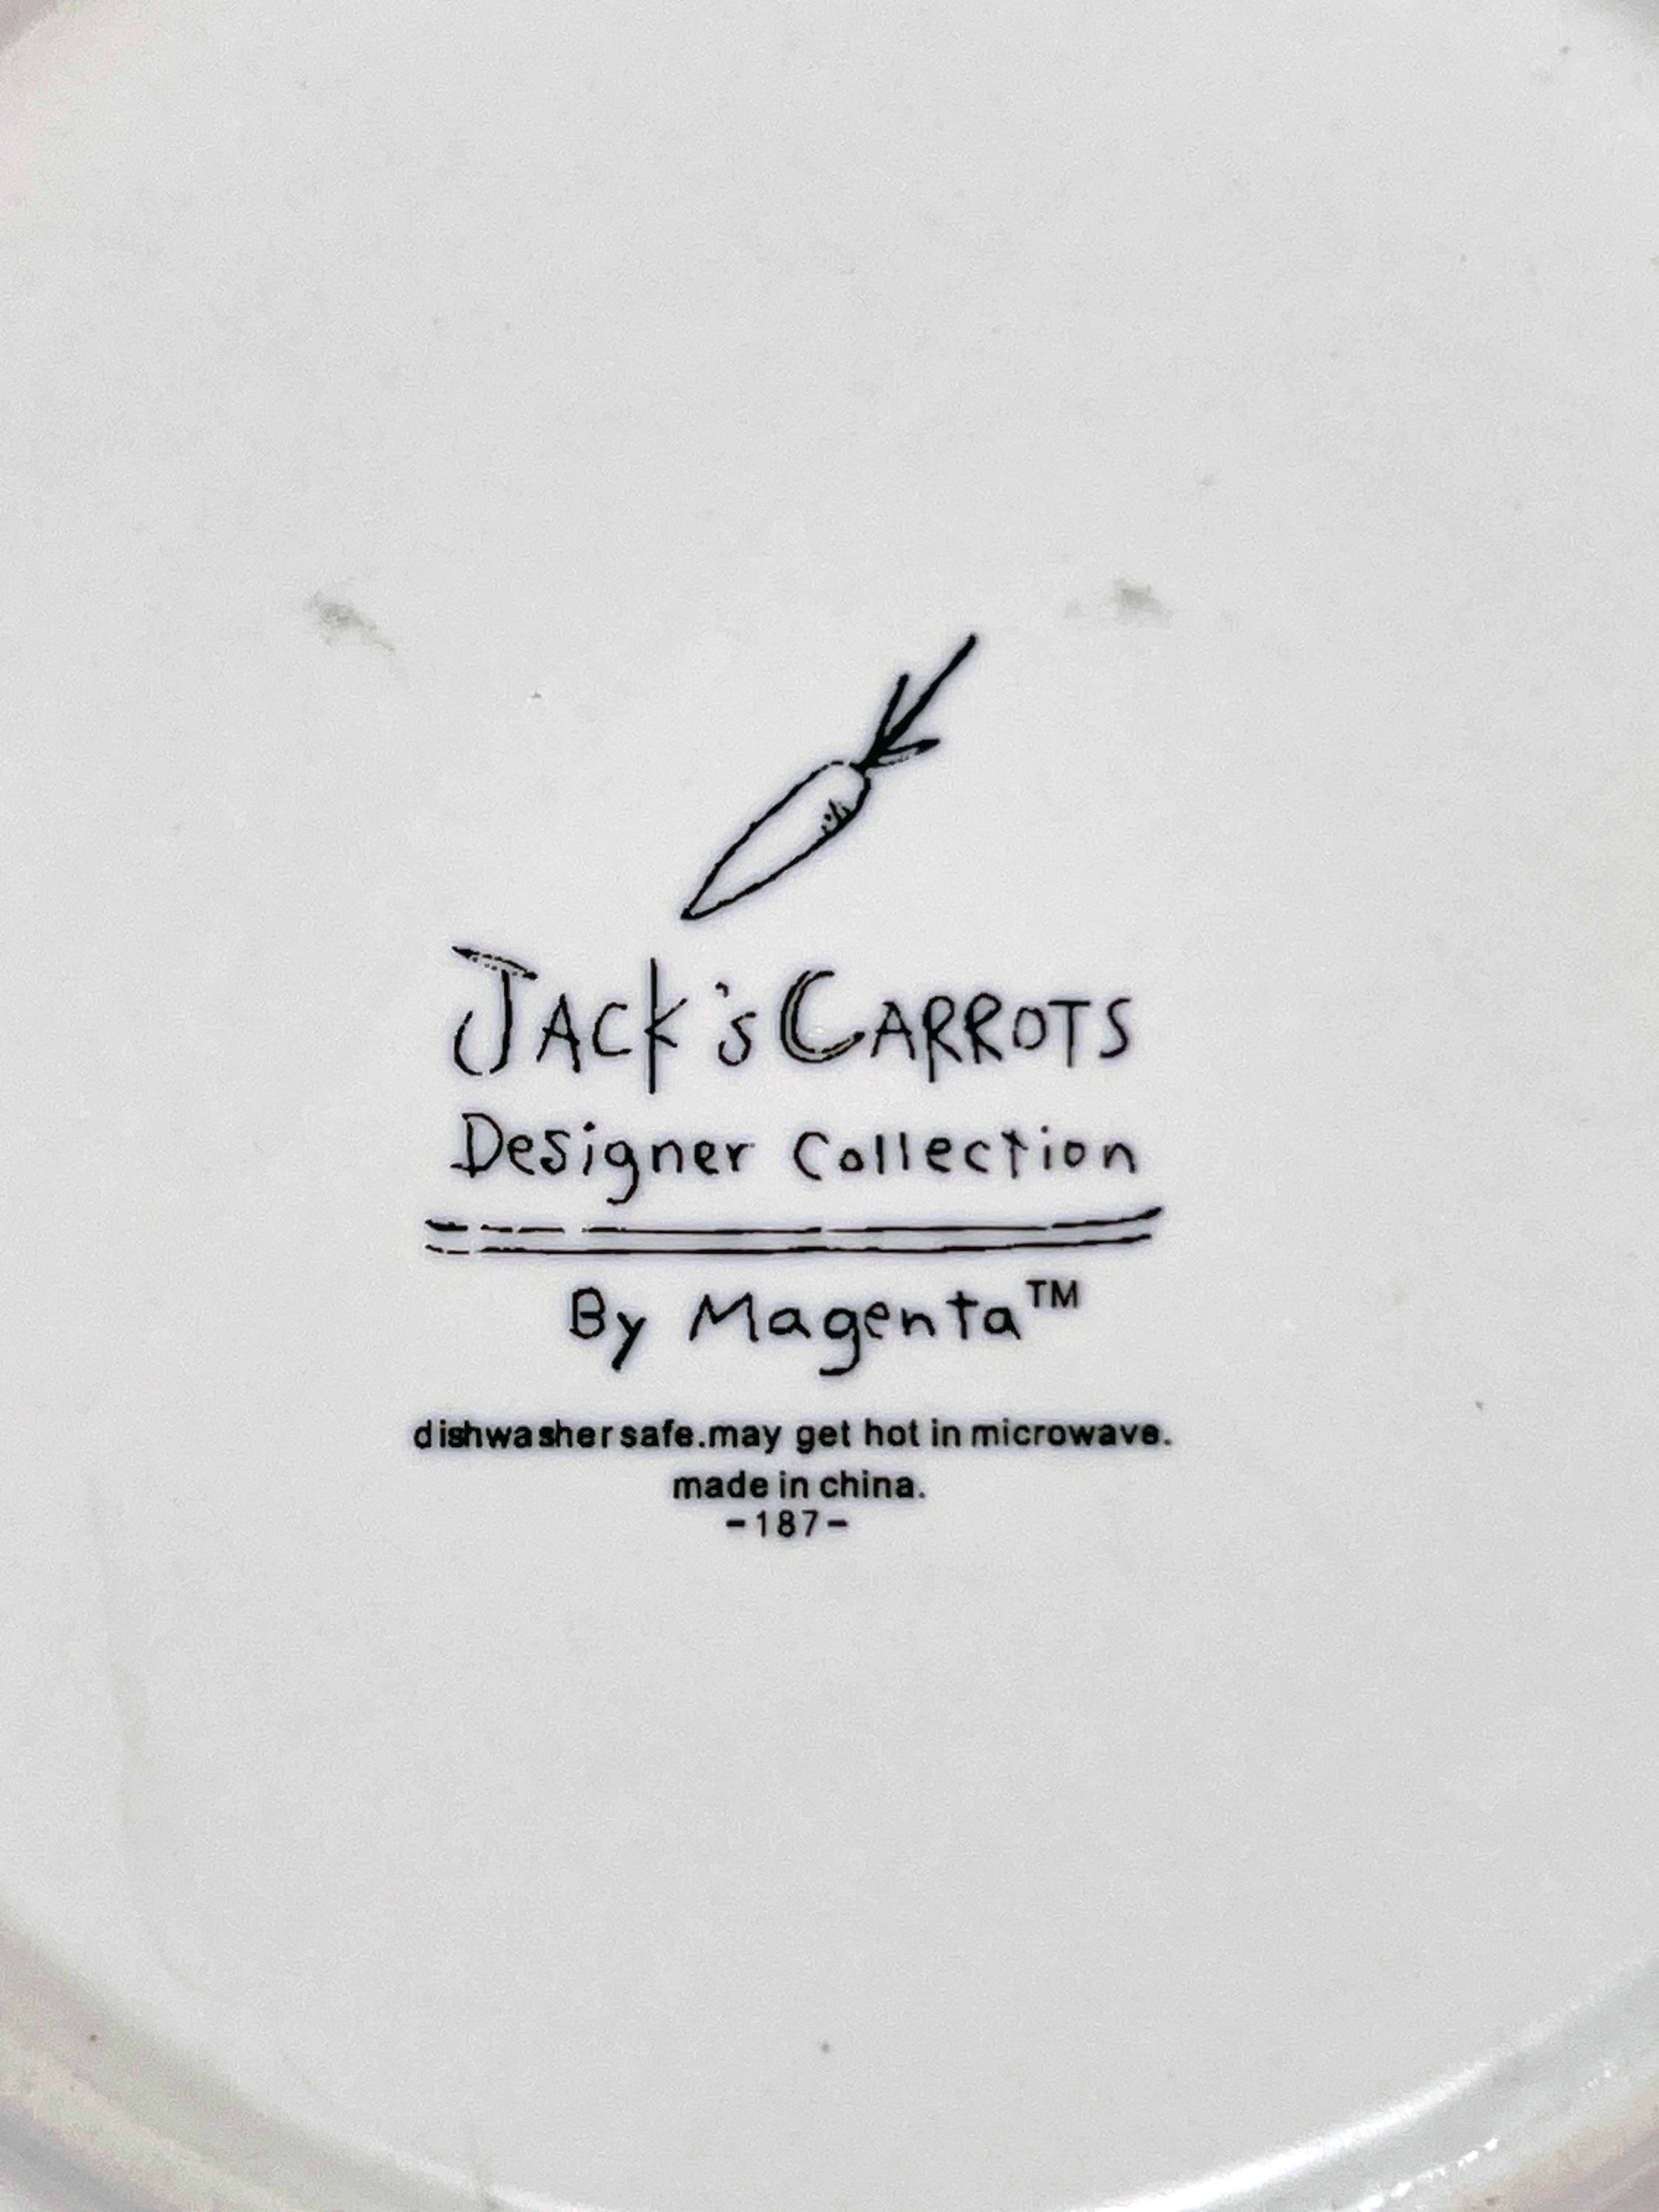 4 Jacks Carrots By Magenta Dishes image 3